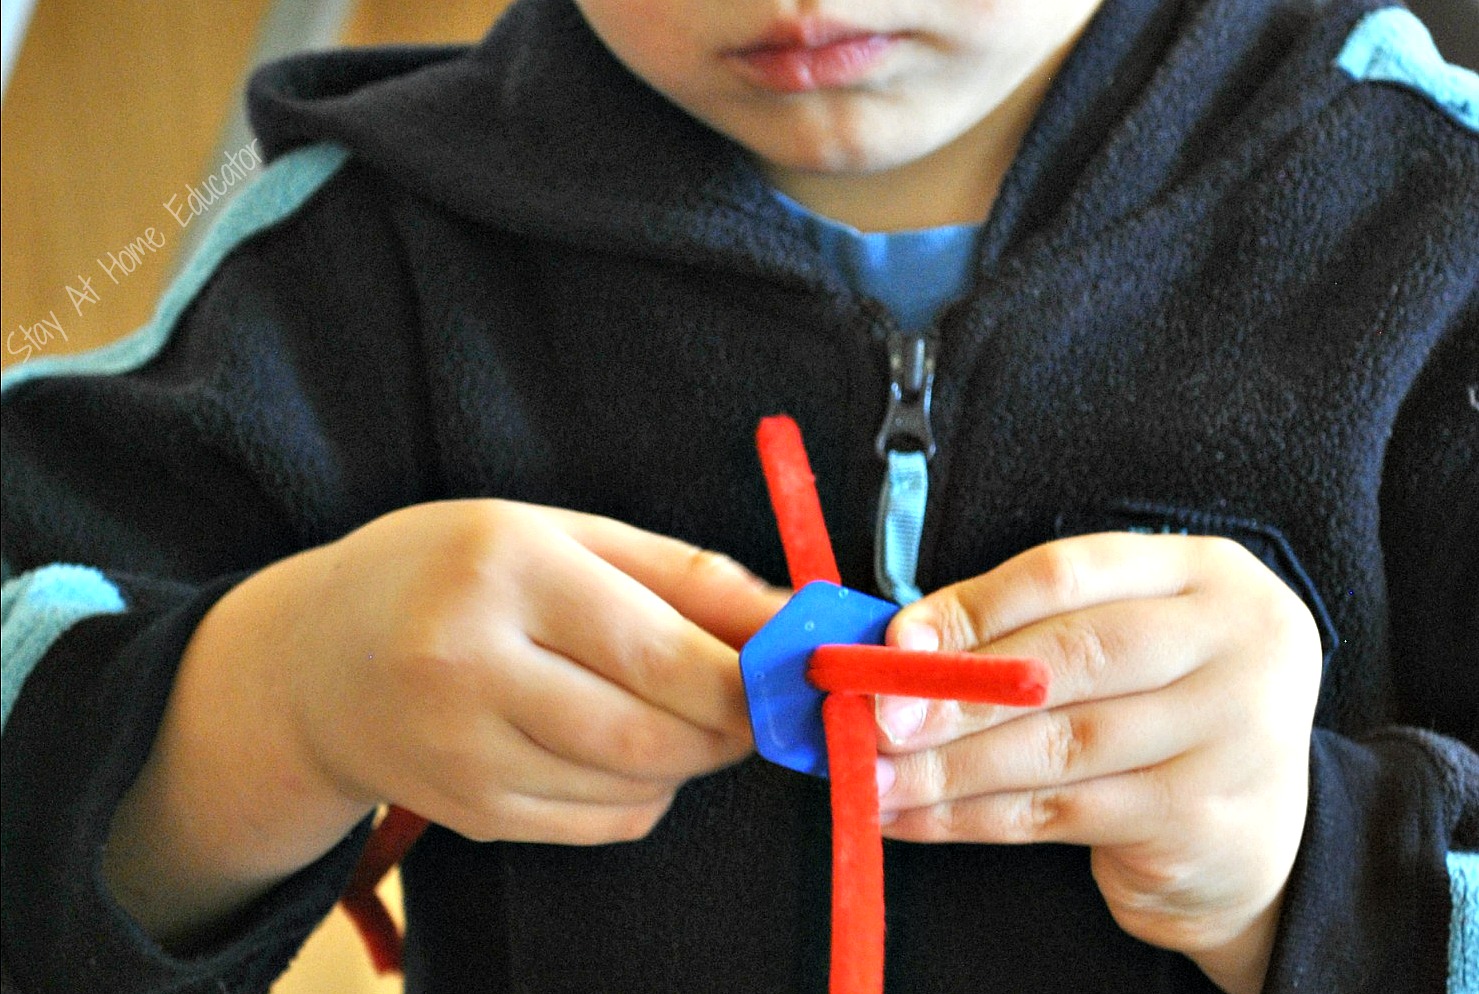 threading buttons onto pipe cleaner during open ended play - Stay At Home Educator